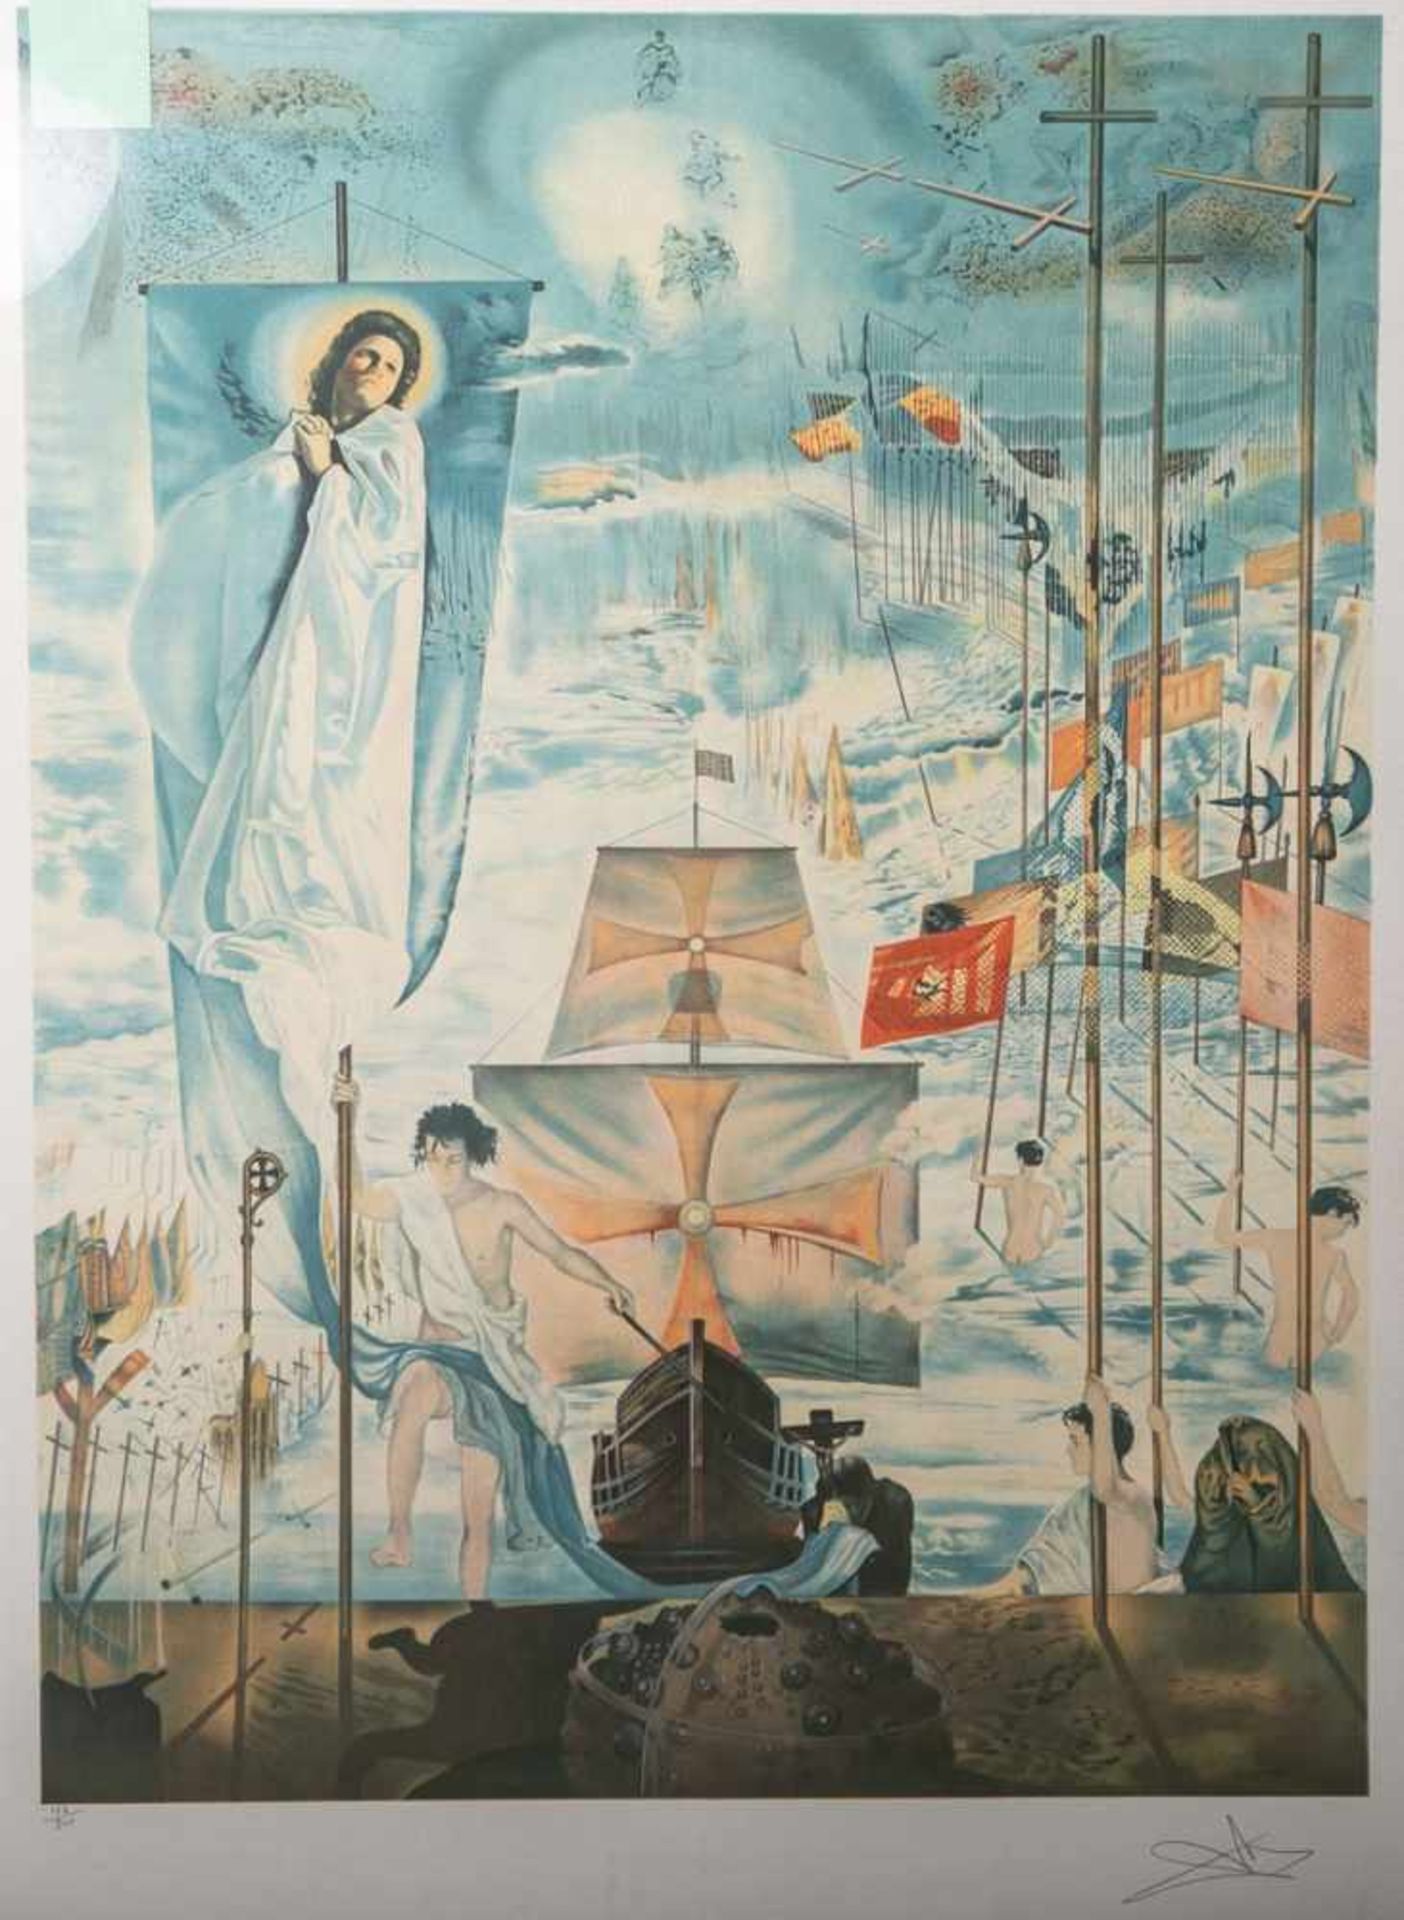 Dali, Salvador (1904 - 1989), "The Discovery of America by Christopher Columbus",